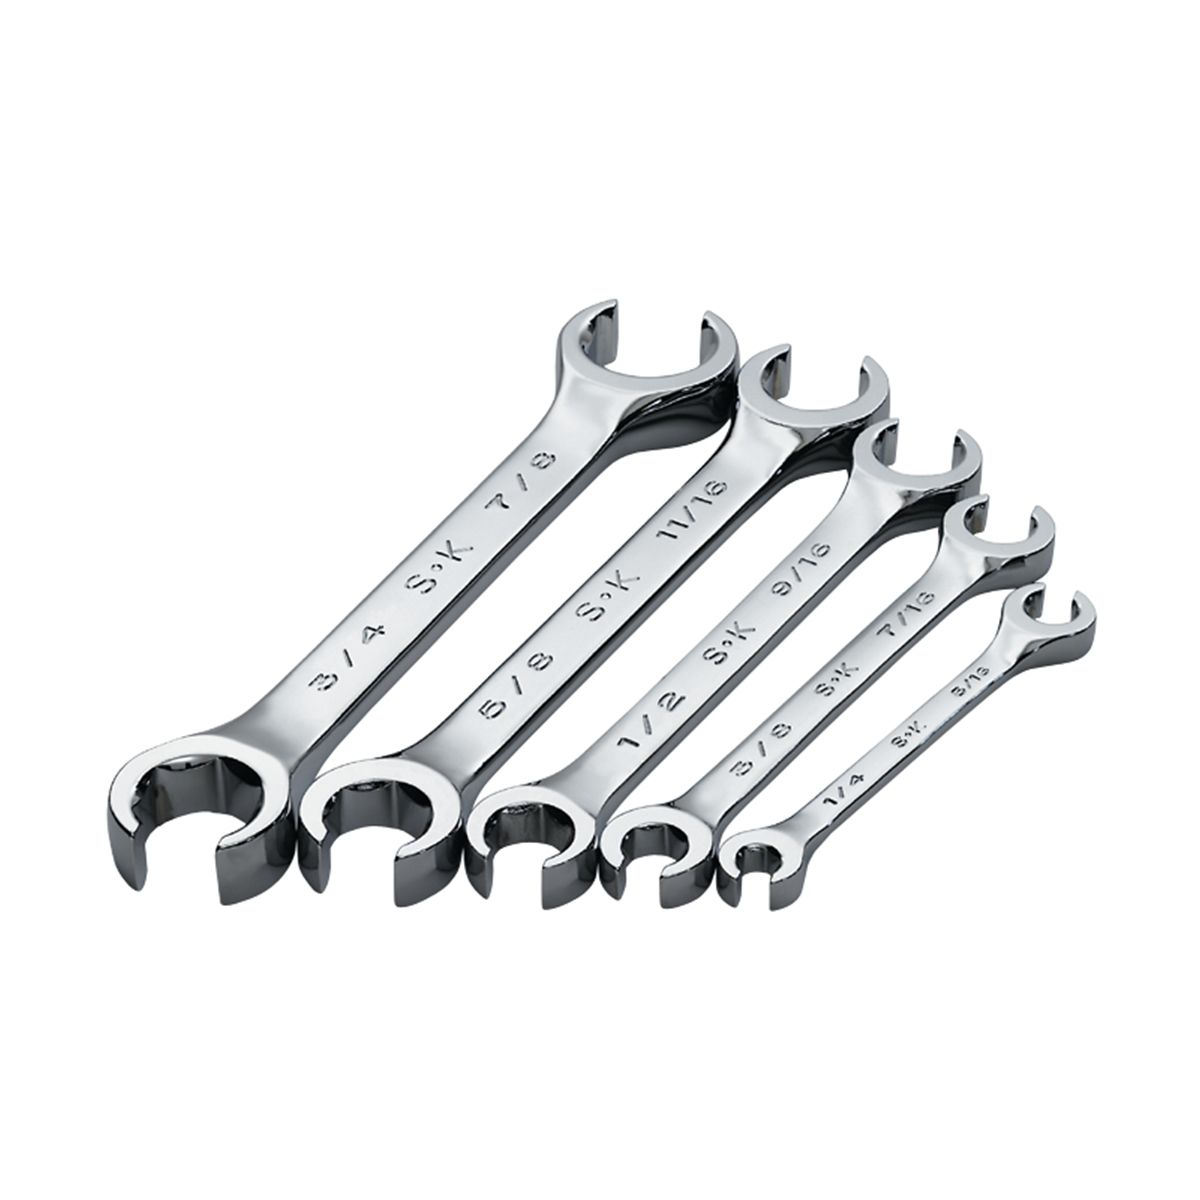 SuperKrome Fractional Flare Nut Wrench Set - 5 Piece